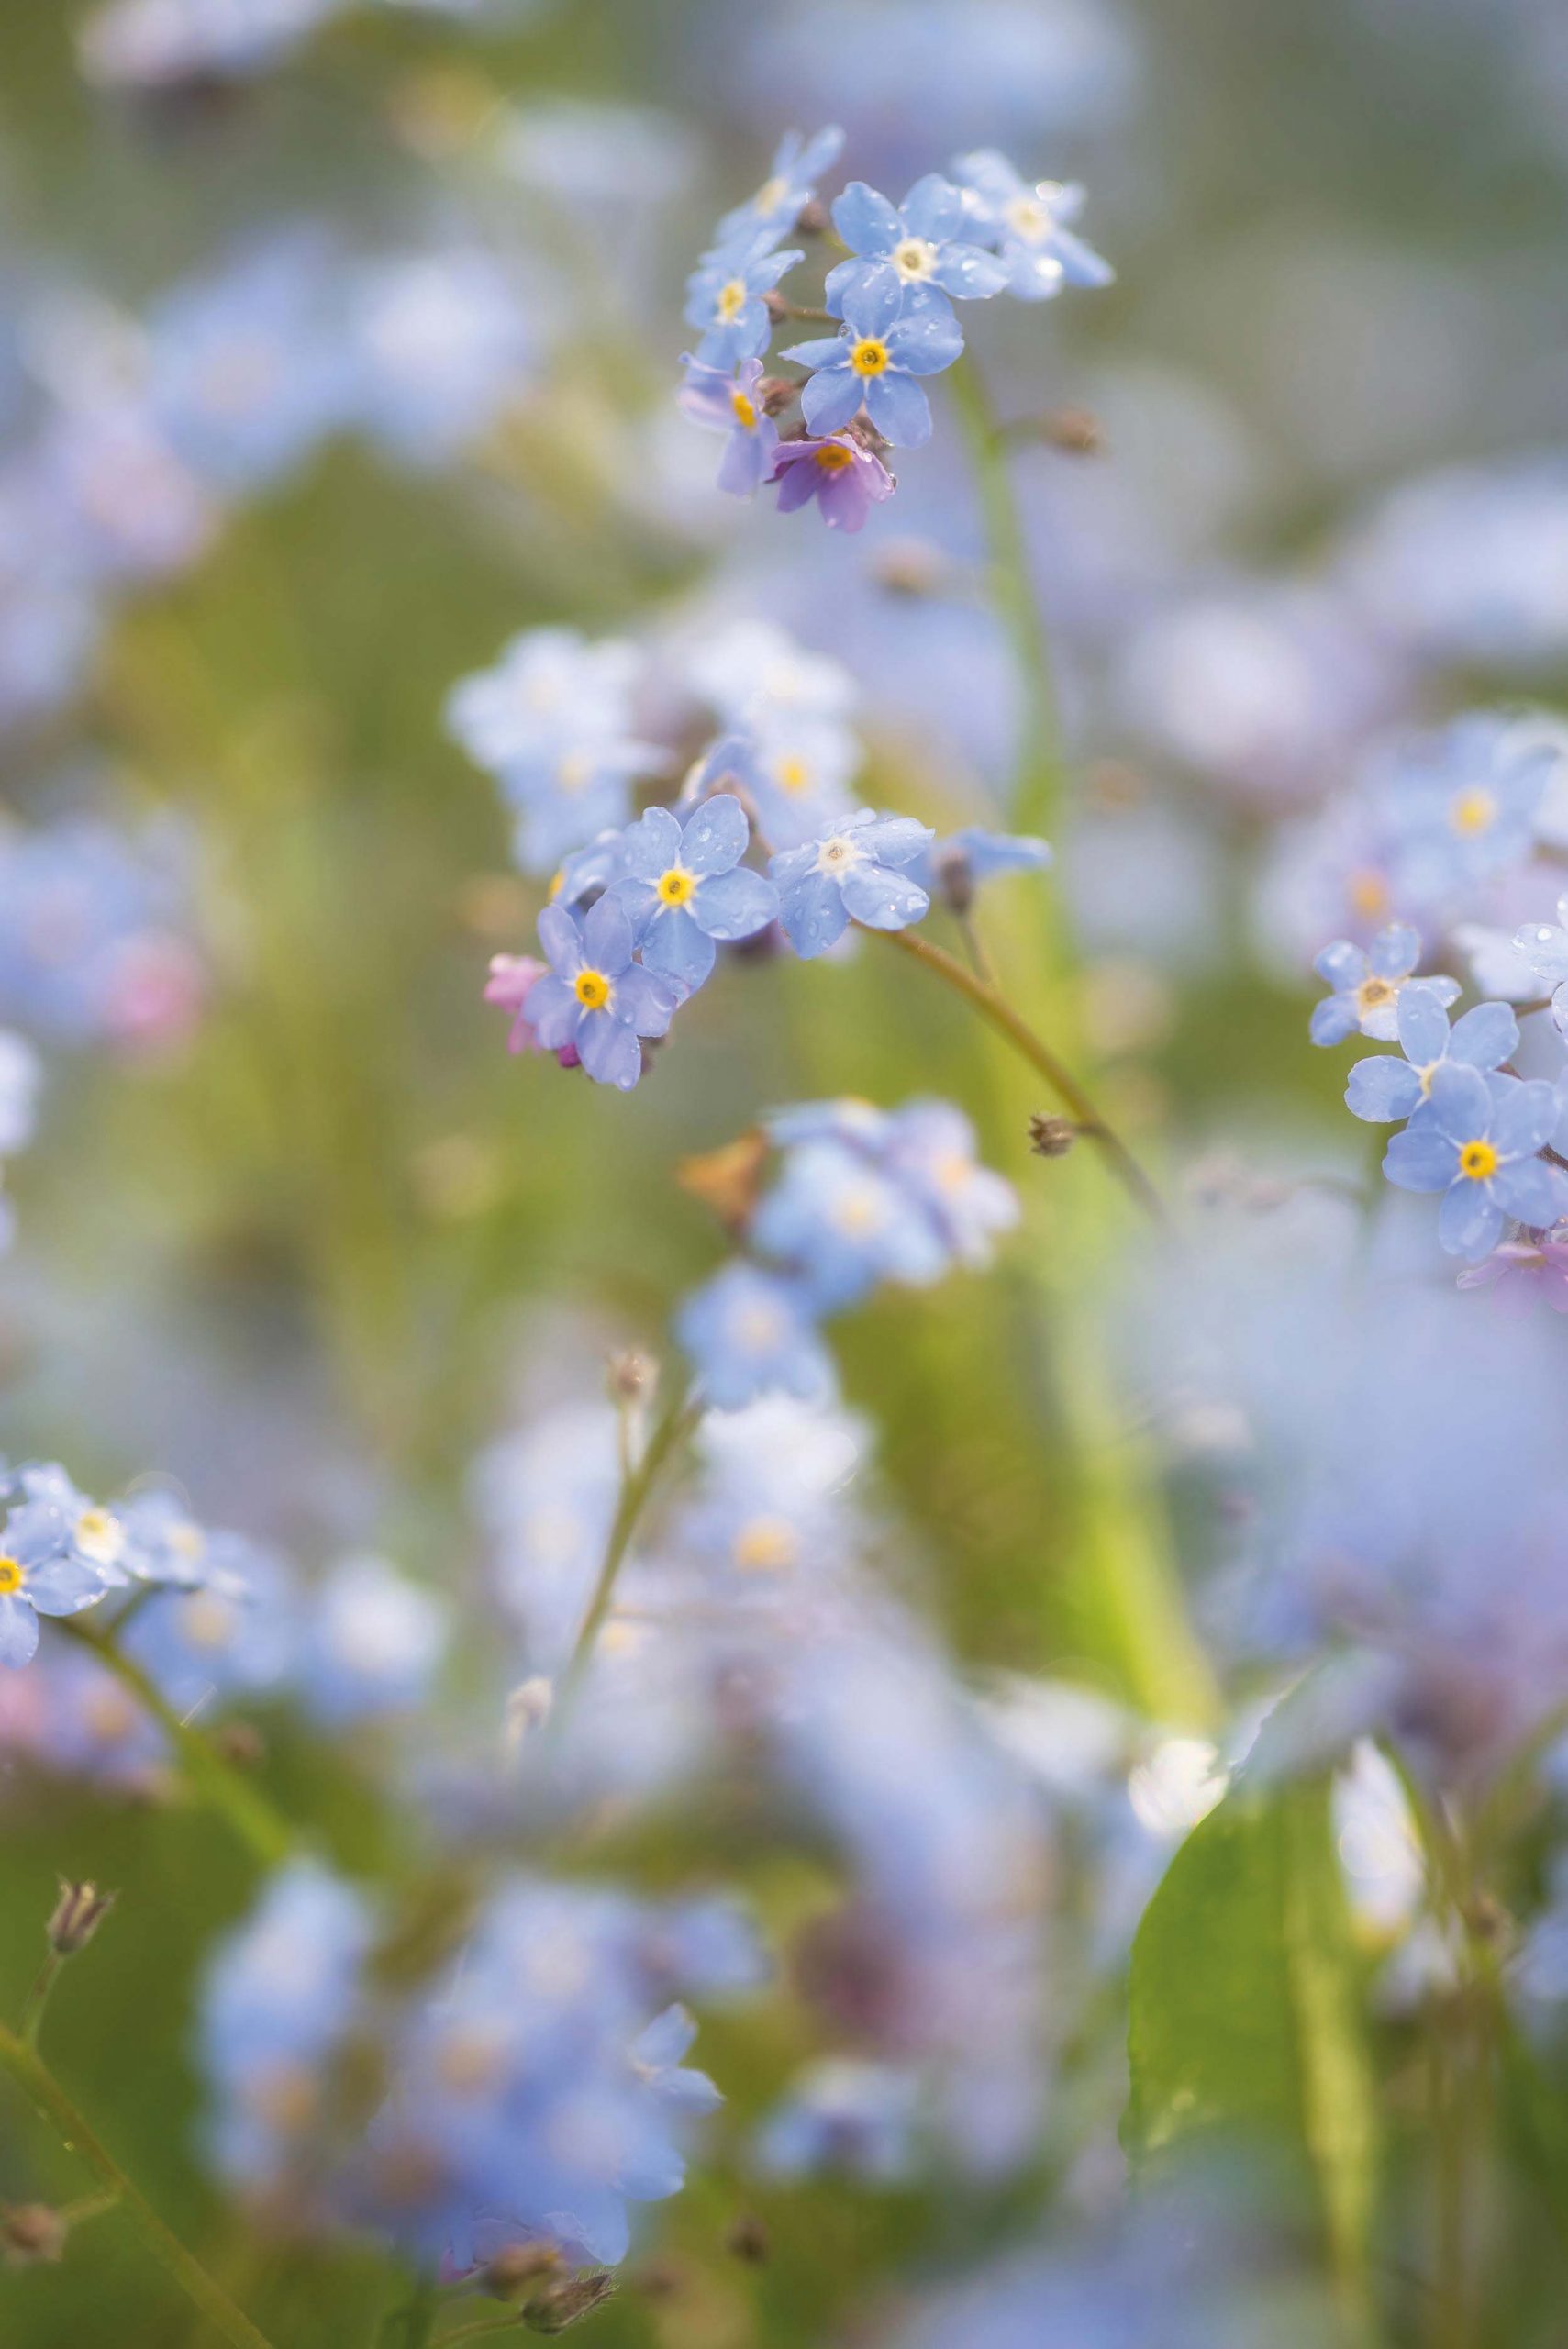 Forget-me-not flowers: how to plant and grow - Gardens Illustrated